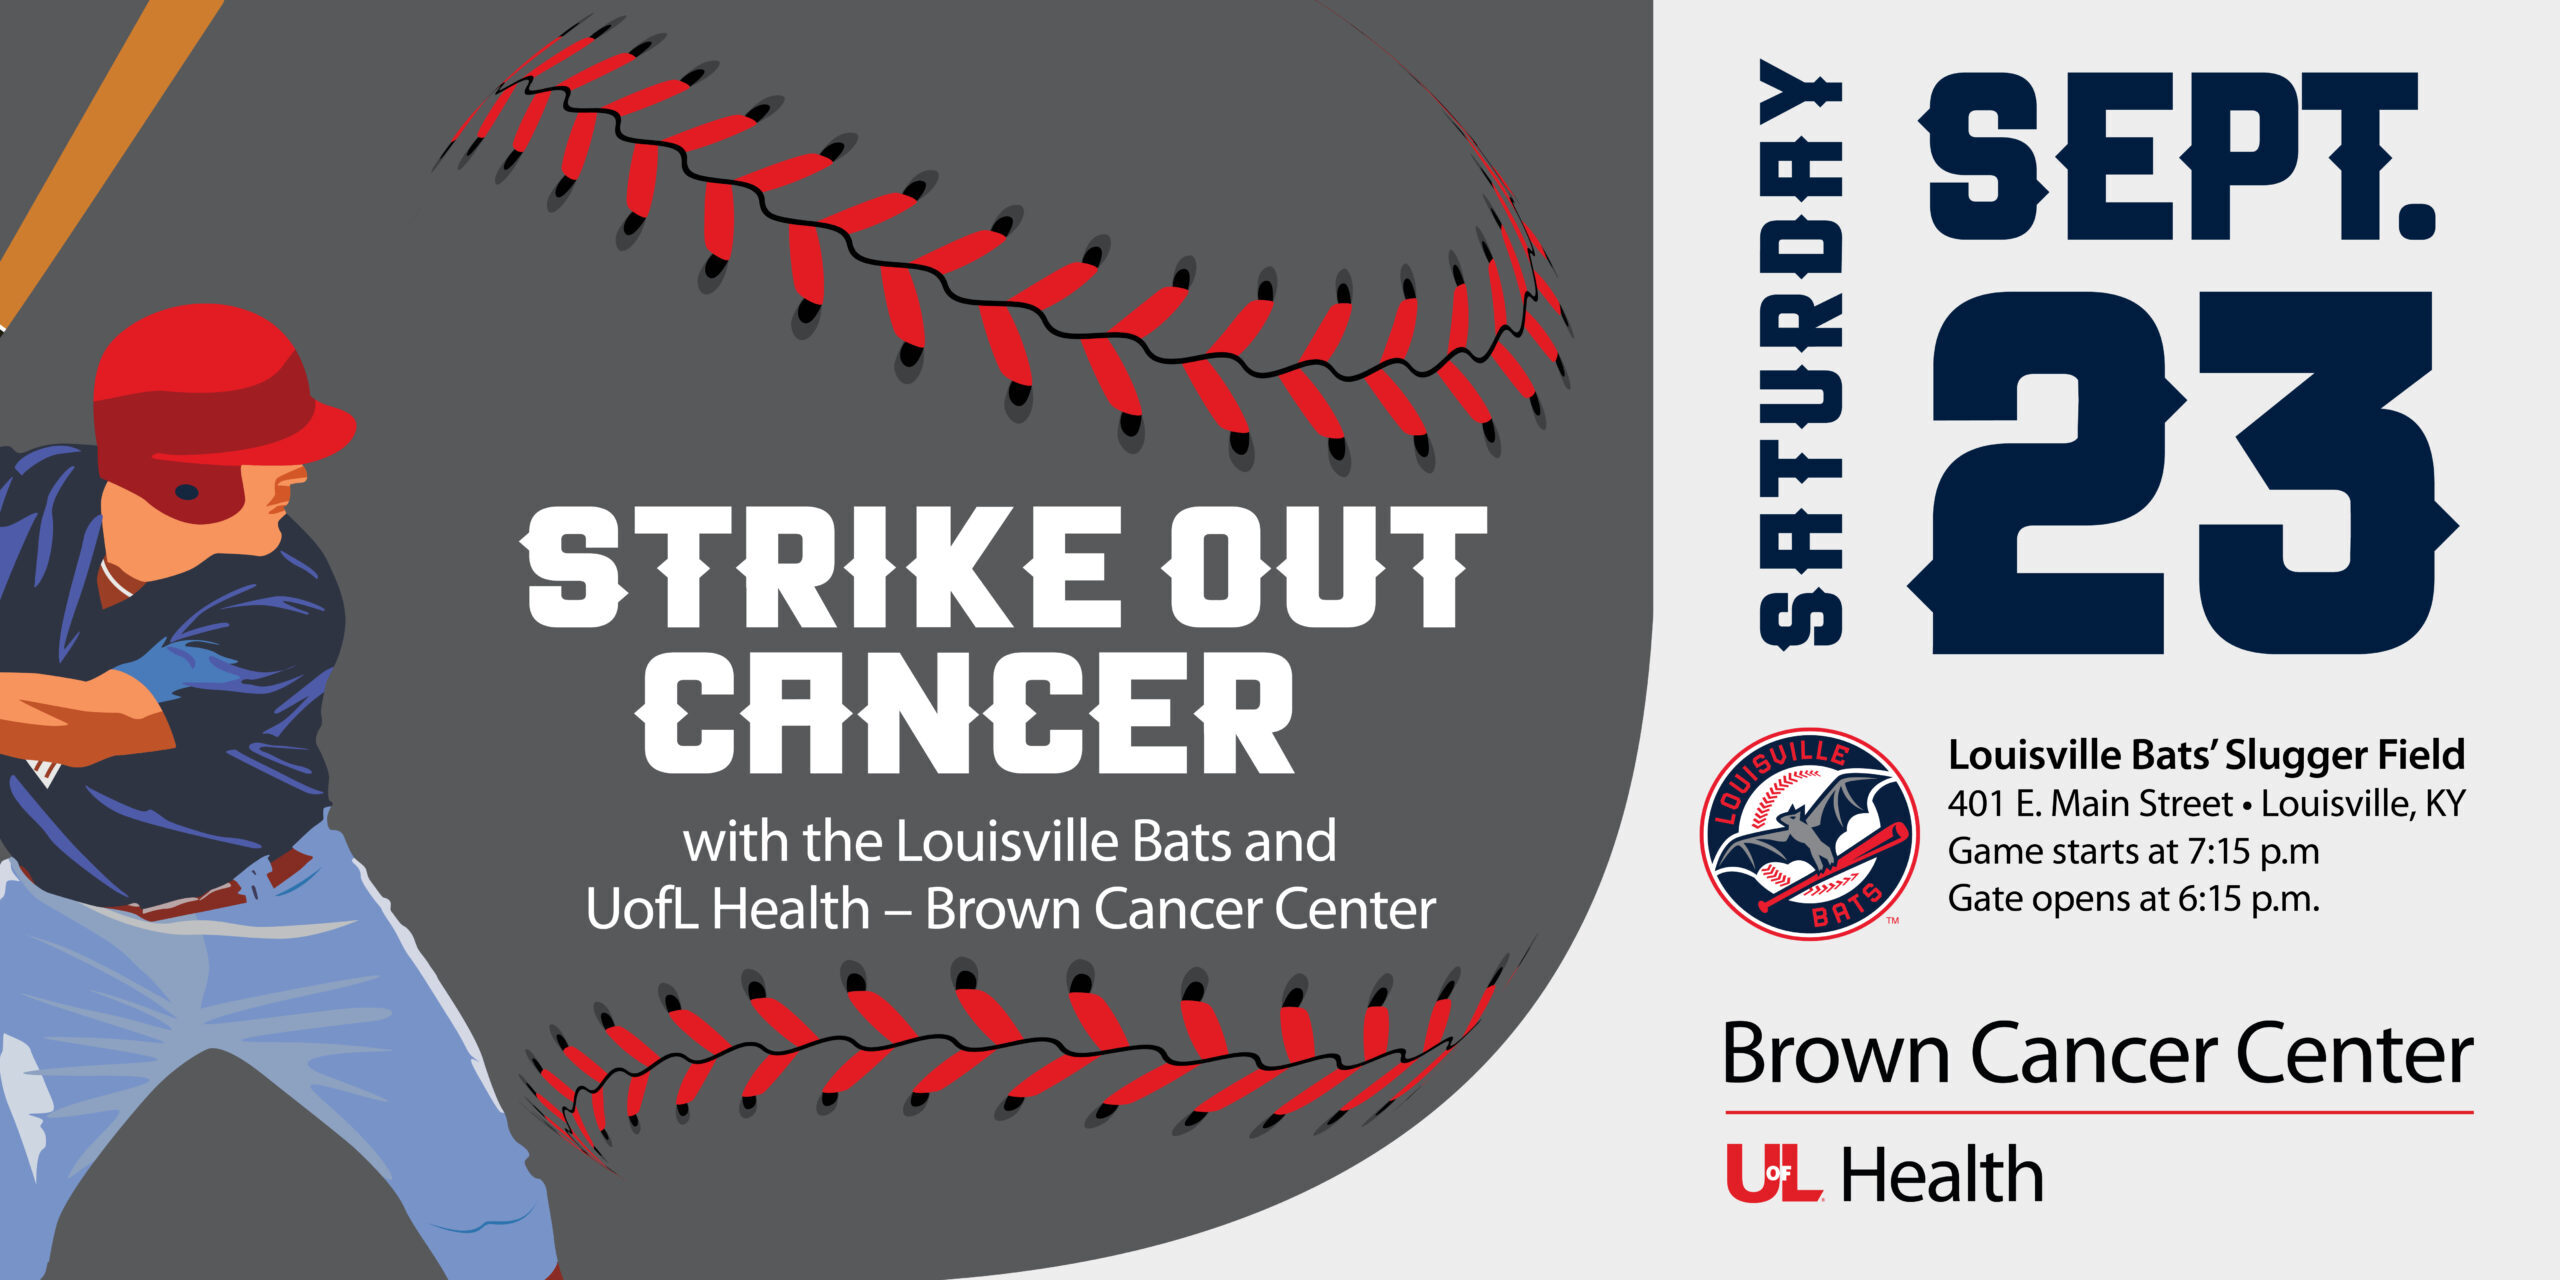 Strikeout Cancer